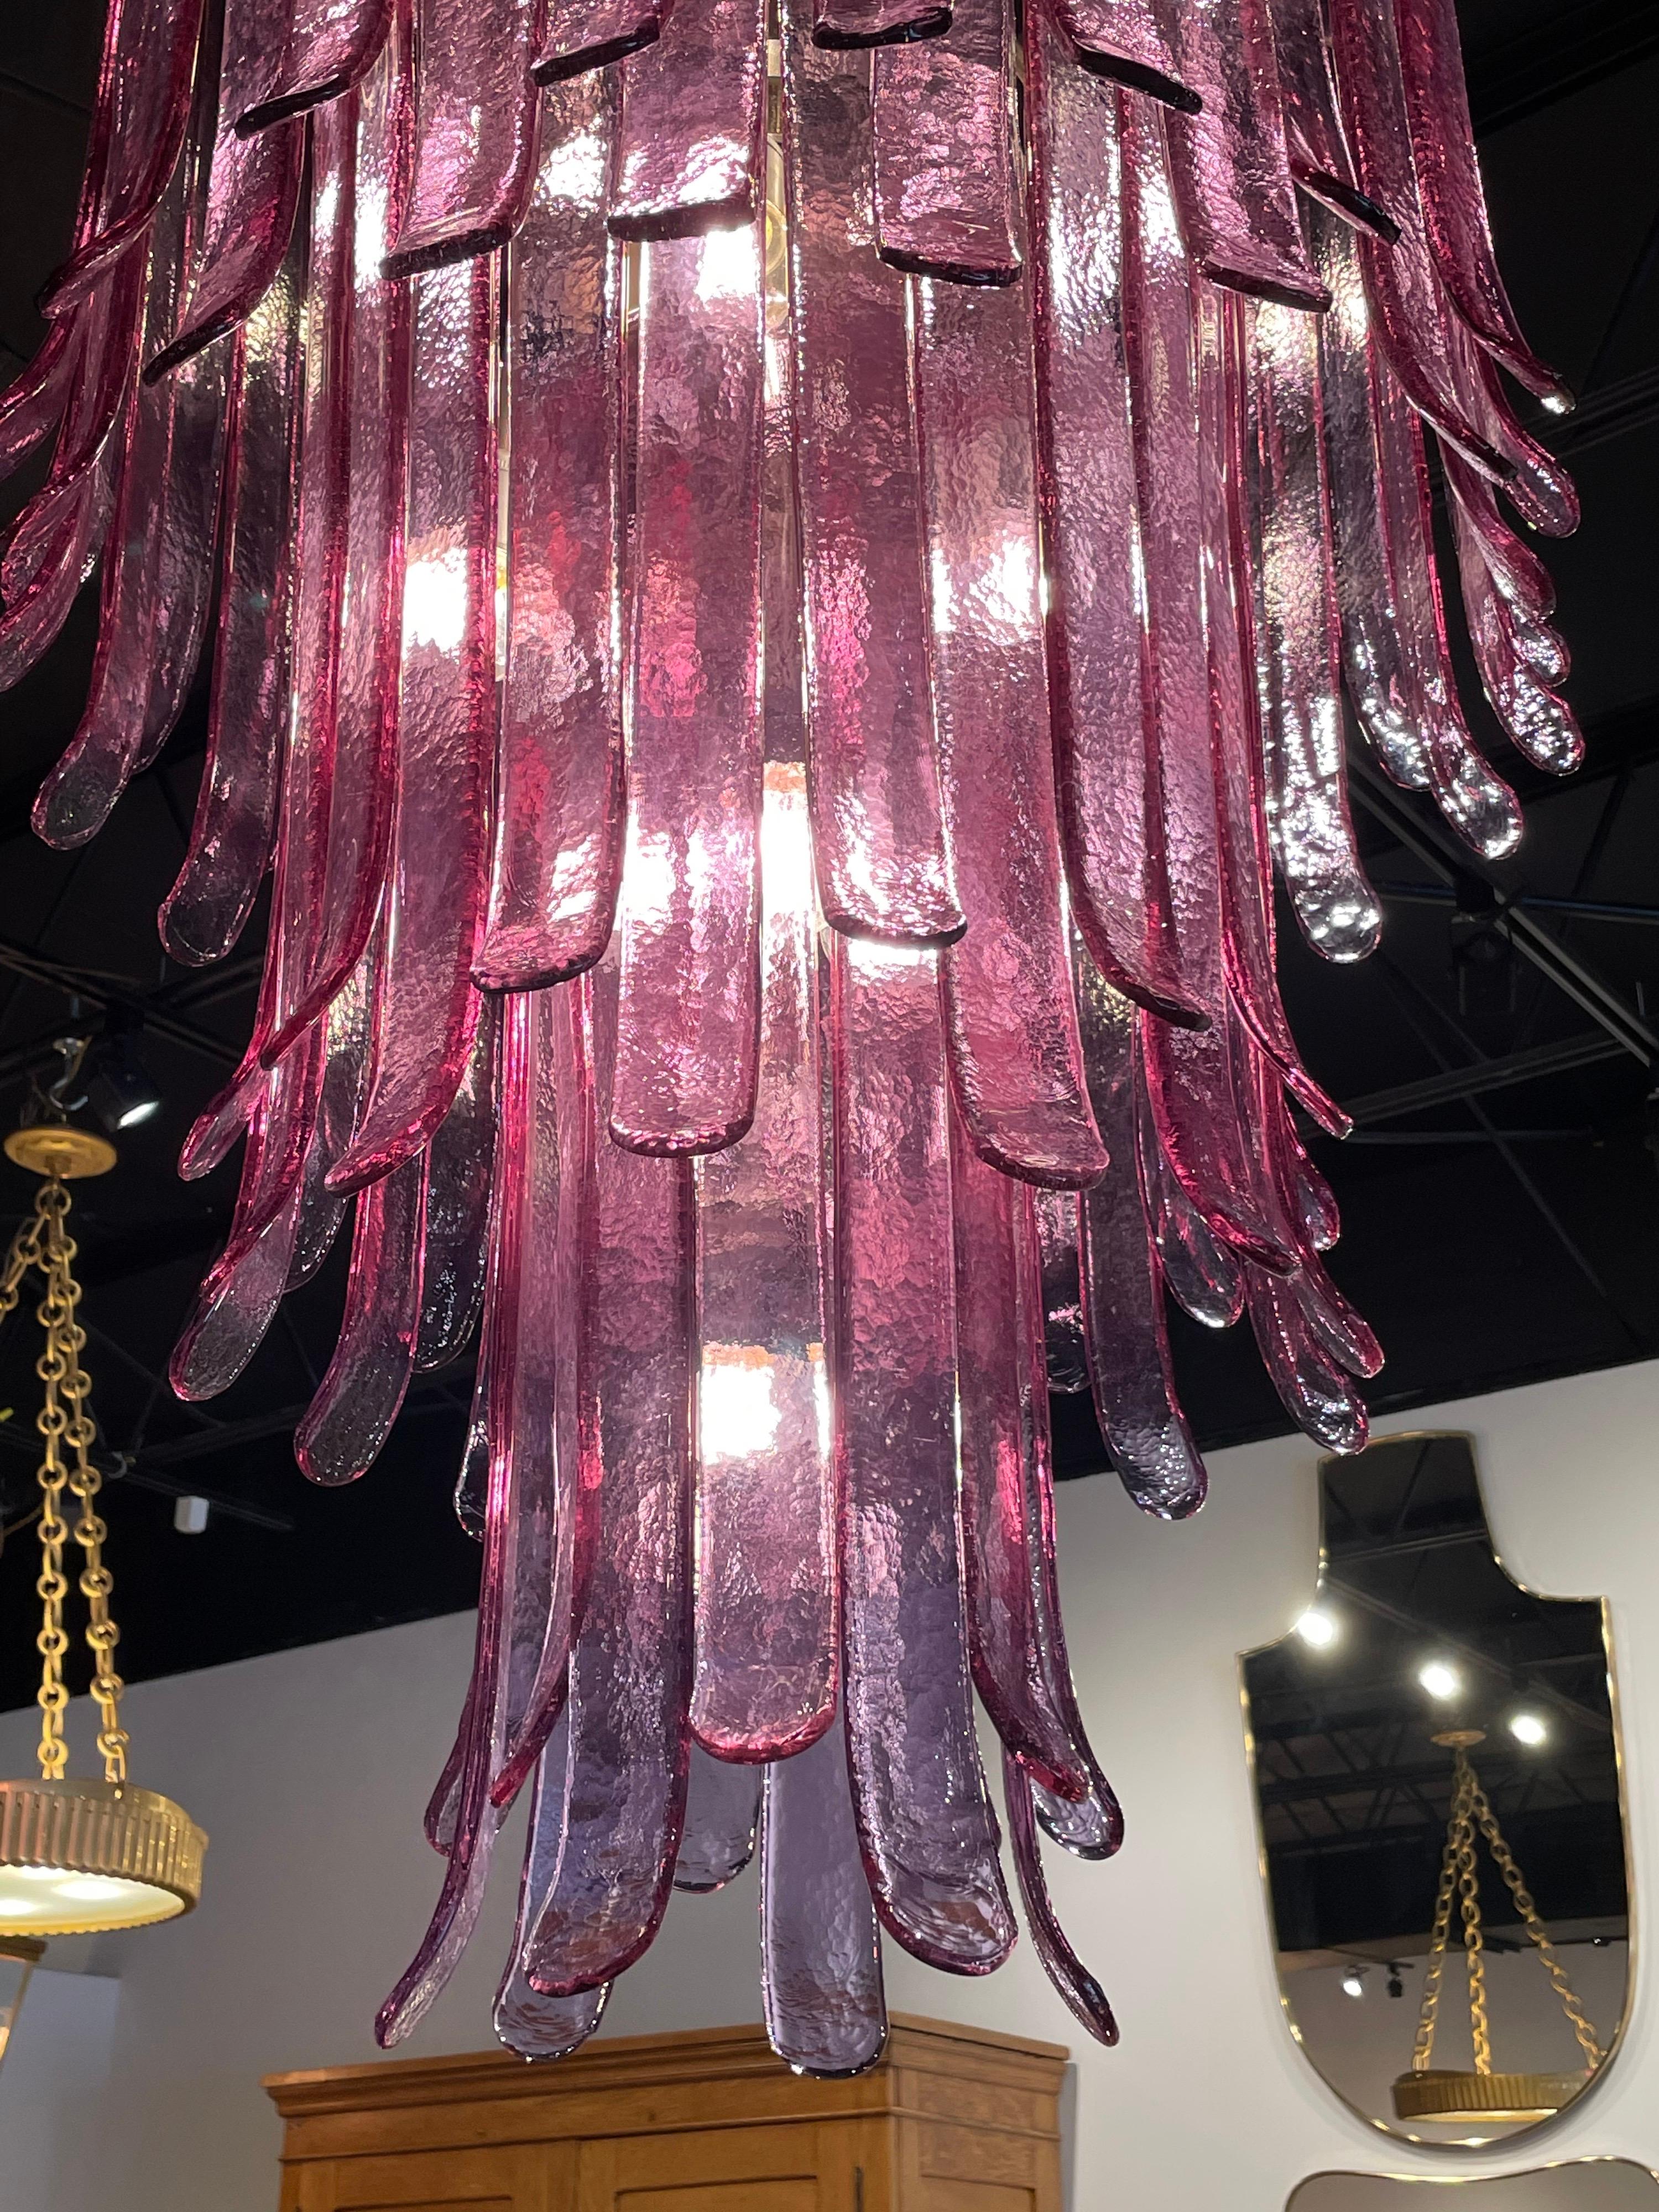 This is a magnificent and oversized Vintage 3-Tier lilac Murano glass chandelier by Mazzega, Italy. Glass pieces in a beautiful lilac/purple hue.
Note: ONLY ONE AVAILABLE.